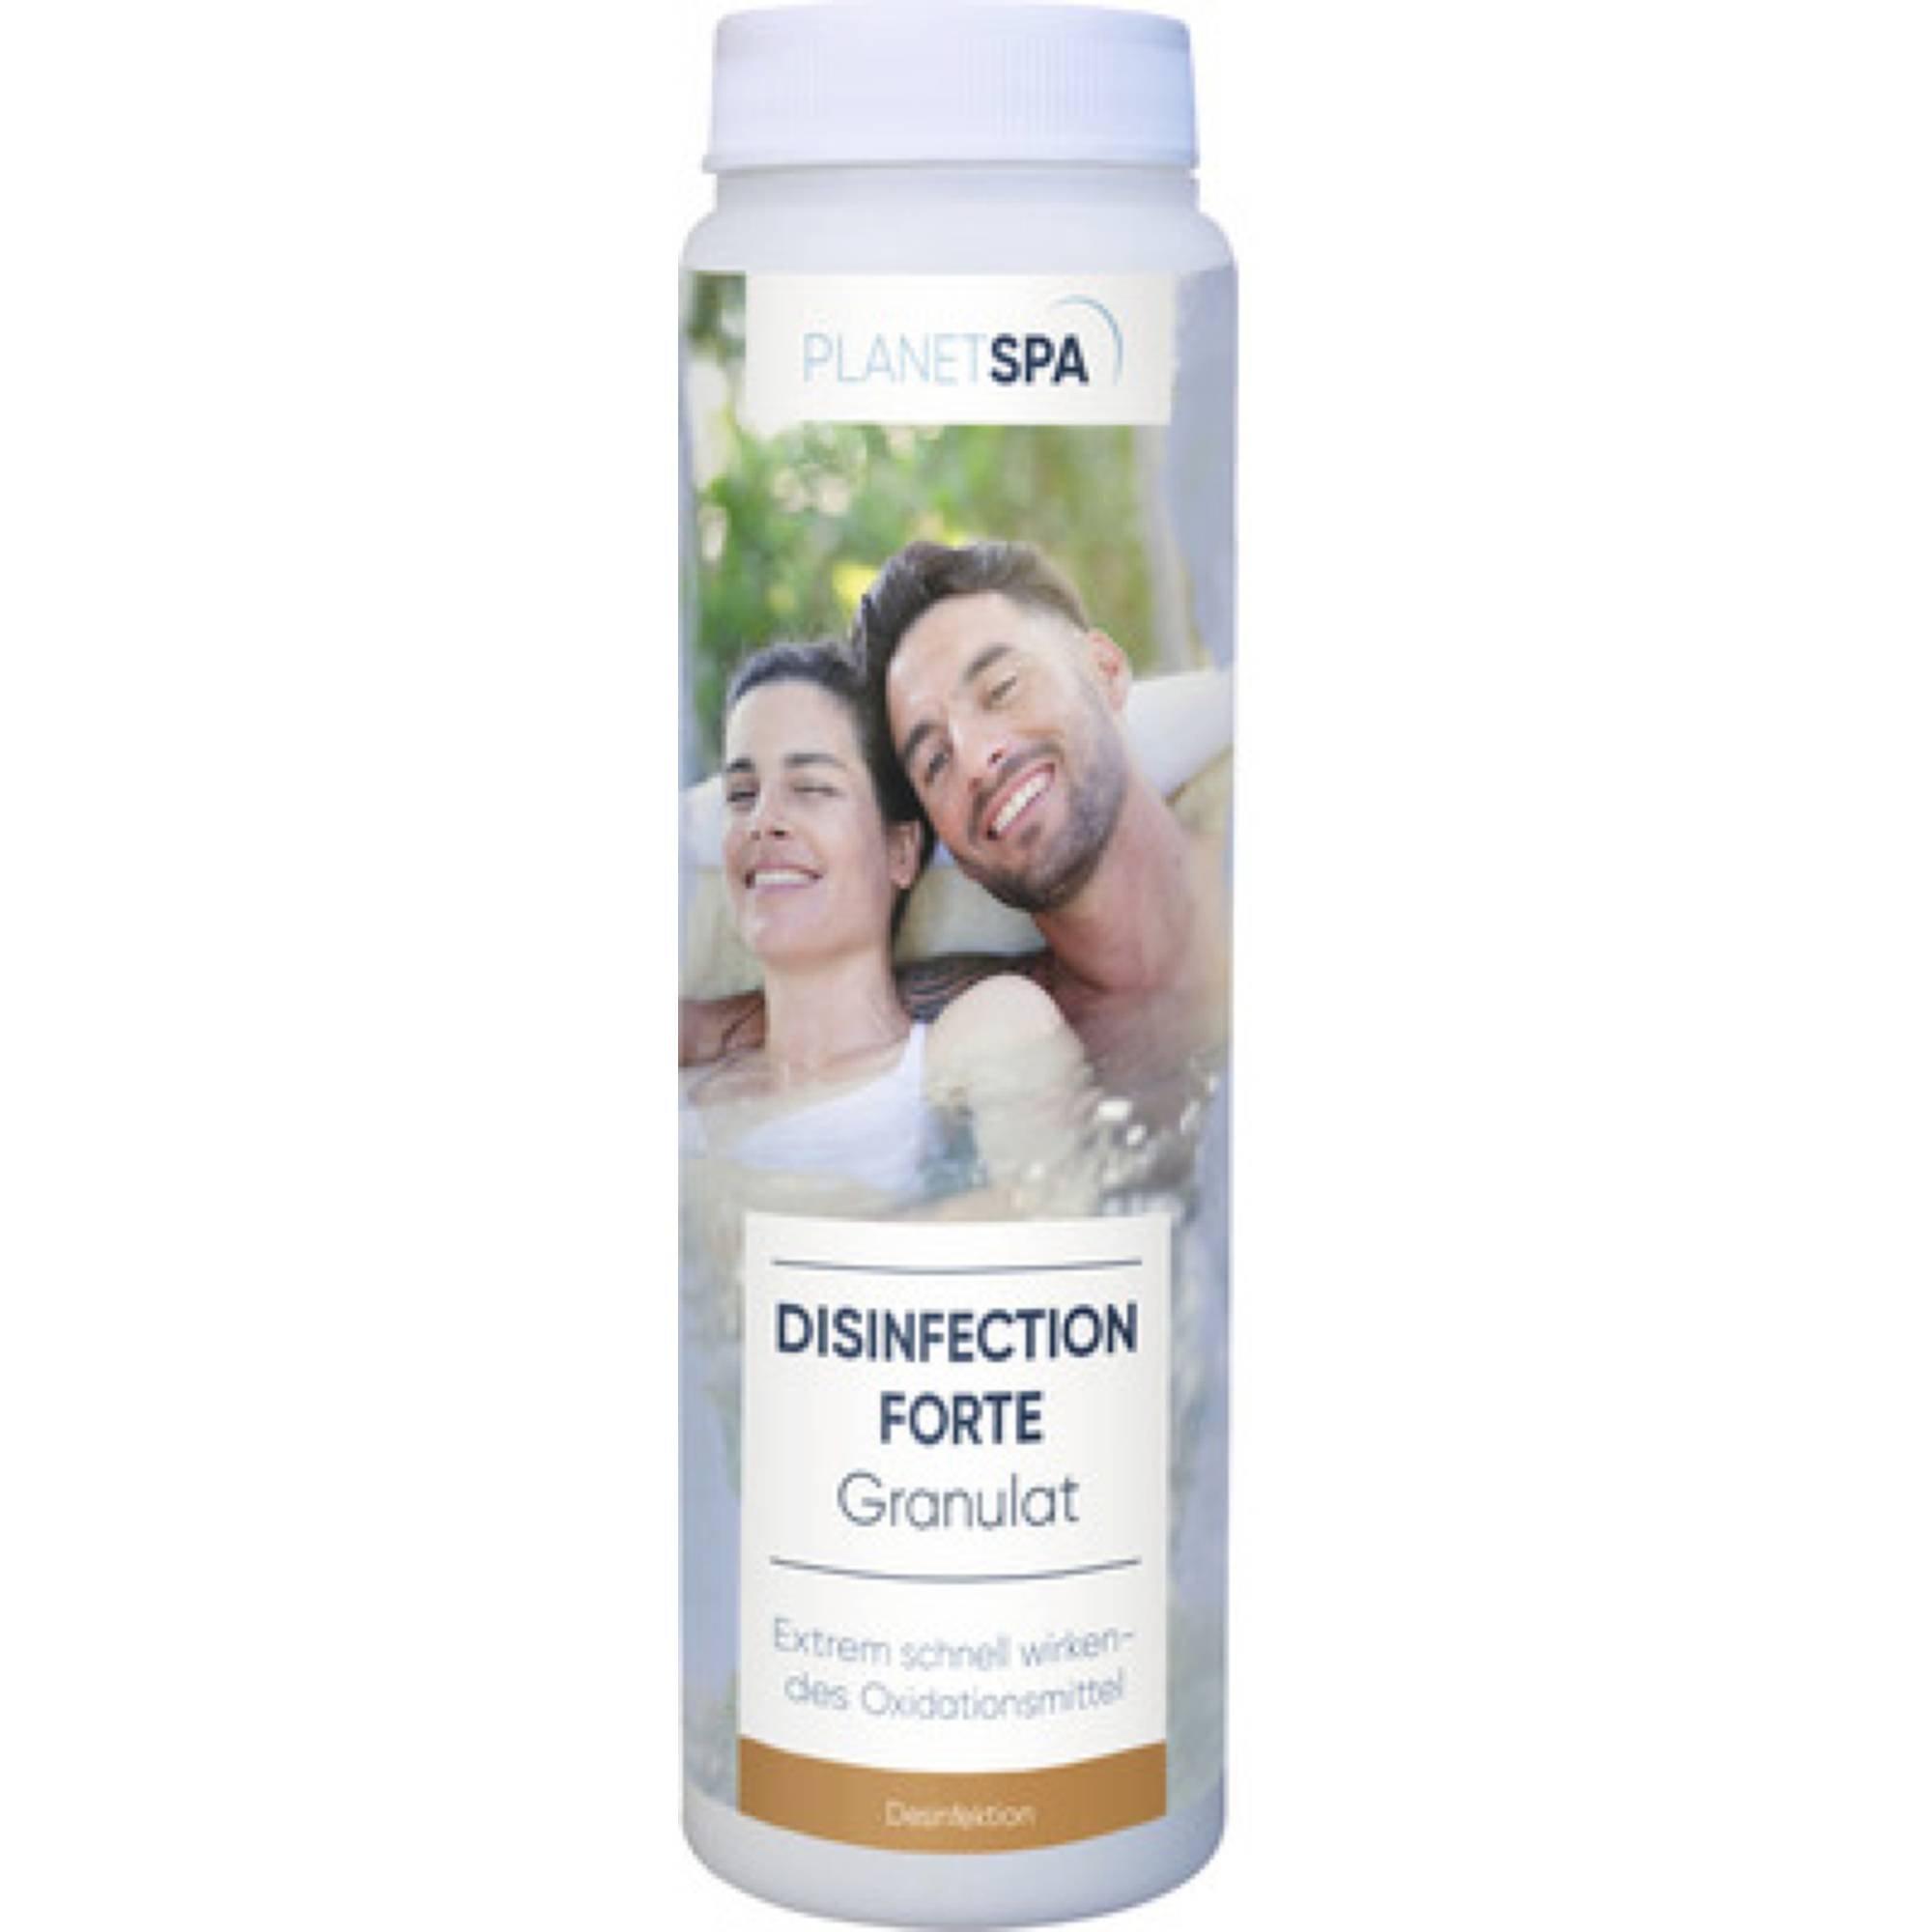 Planet SPA Disinfection Forte 0,6 kg